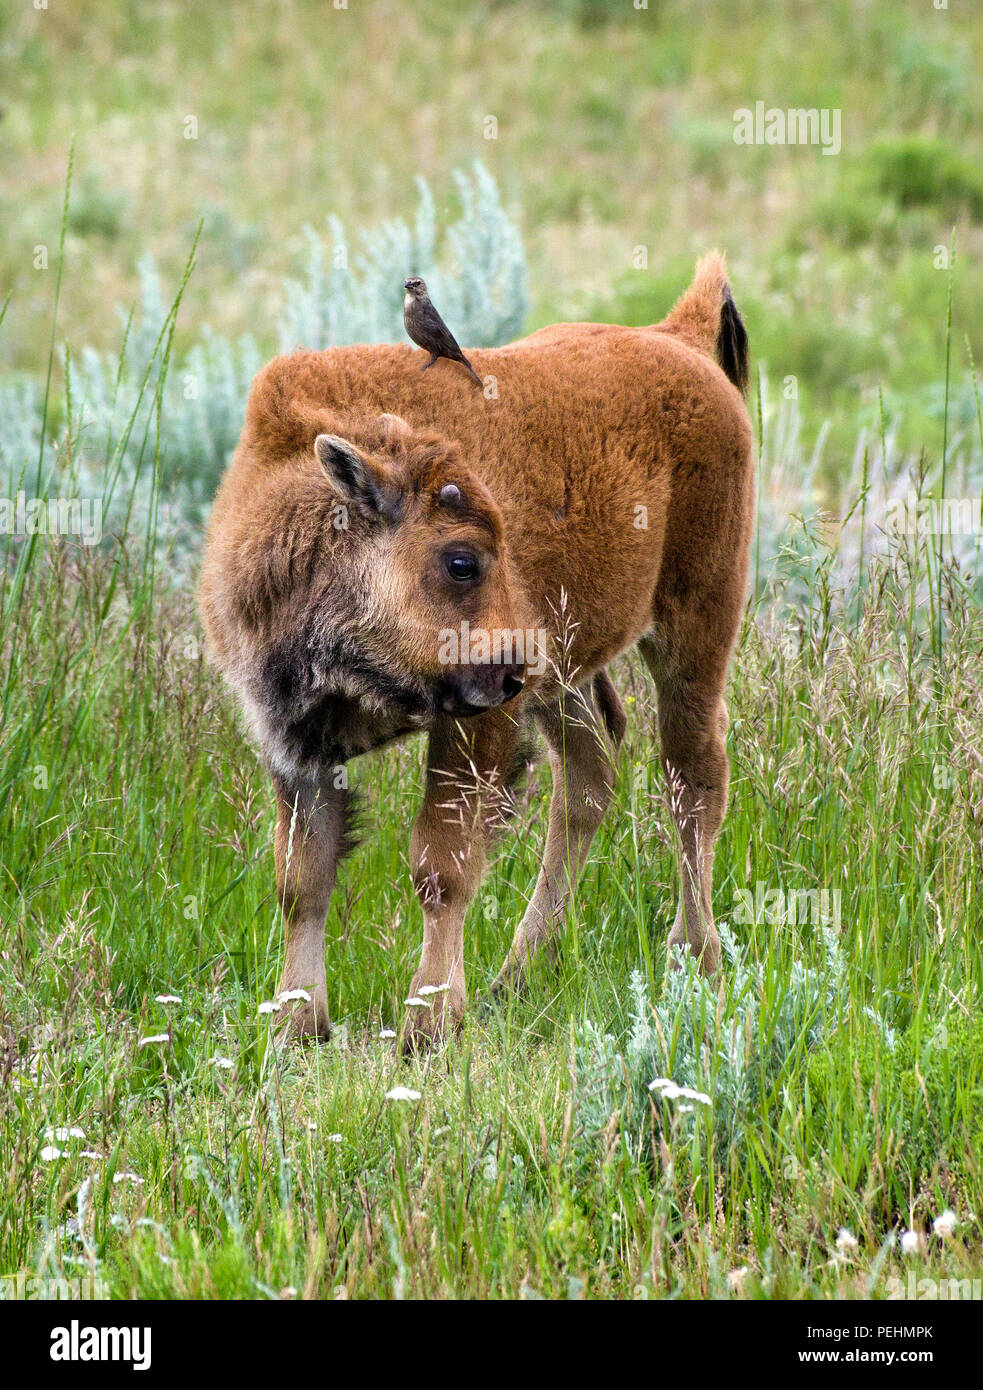 Bison calf with a bird sitting on its back in Yellowstone National Park, Wyoming, the United States. Stock Photo